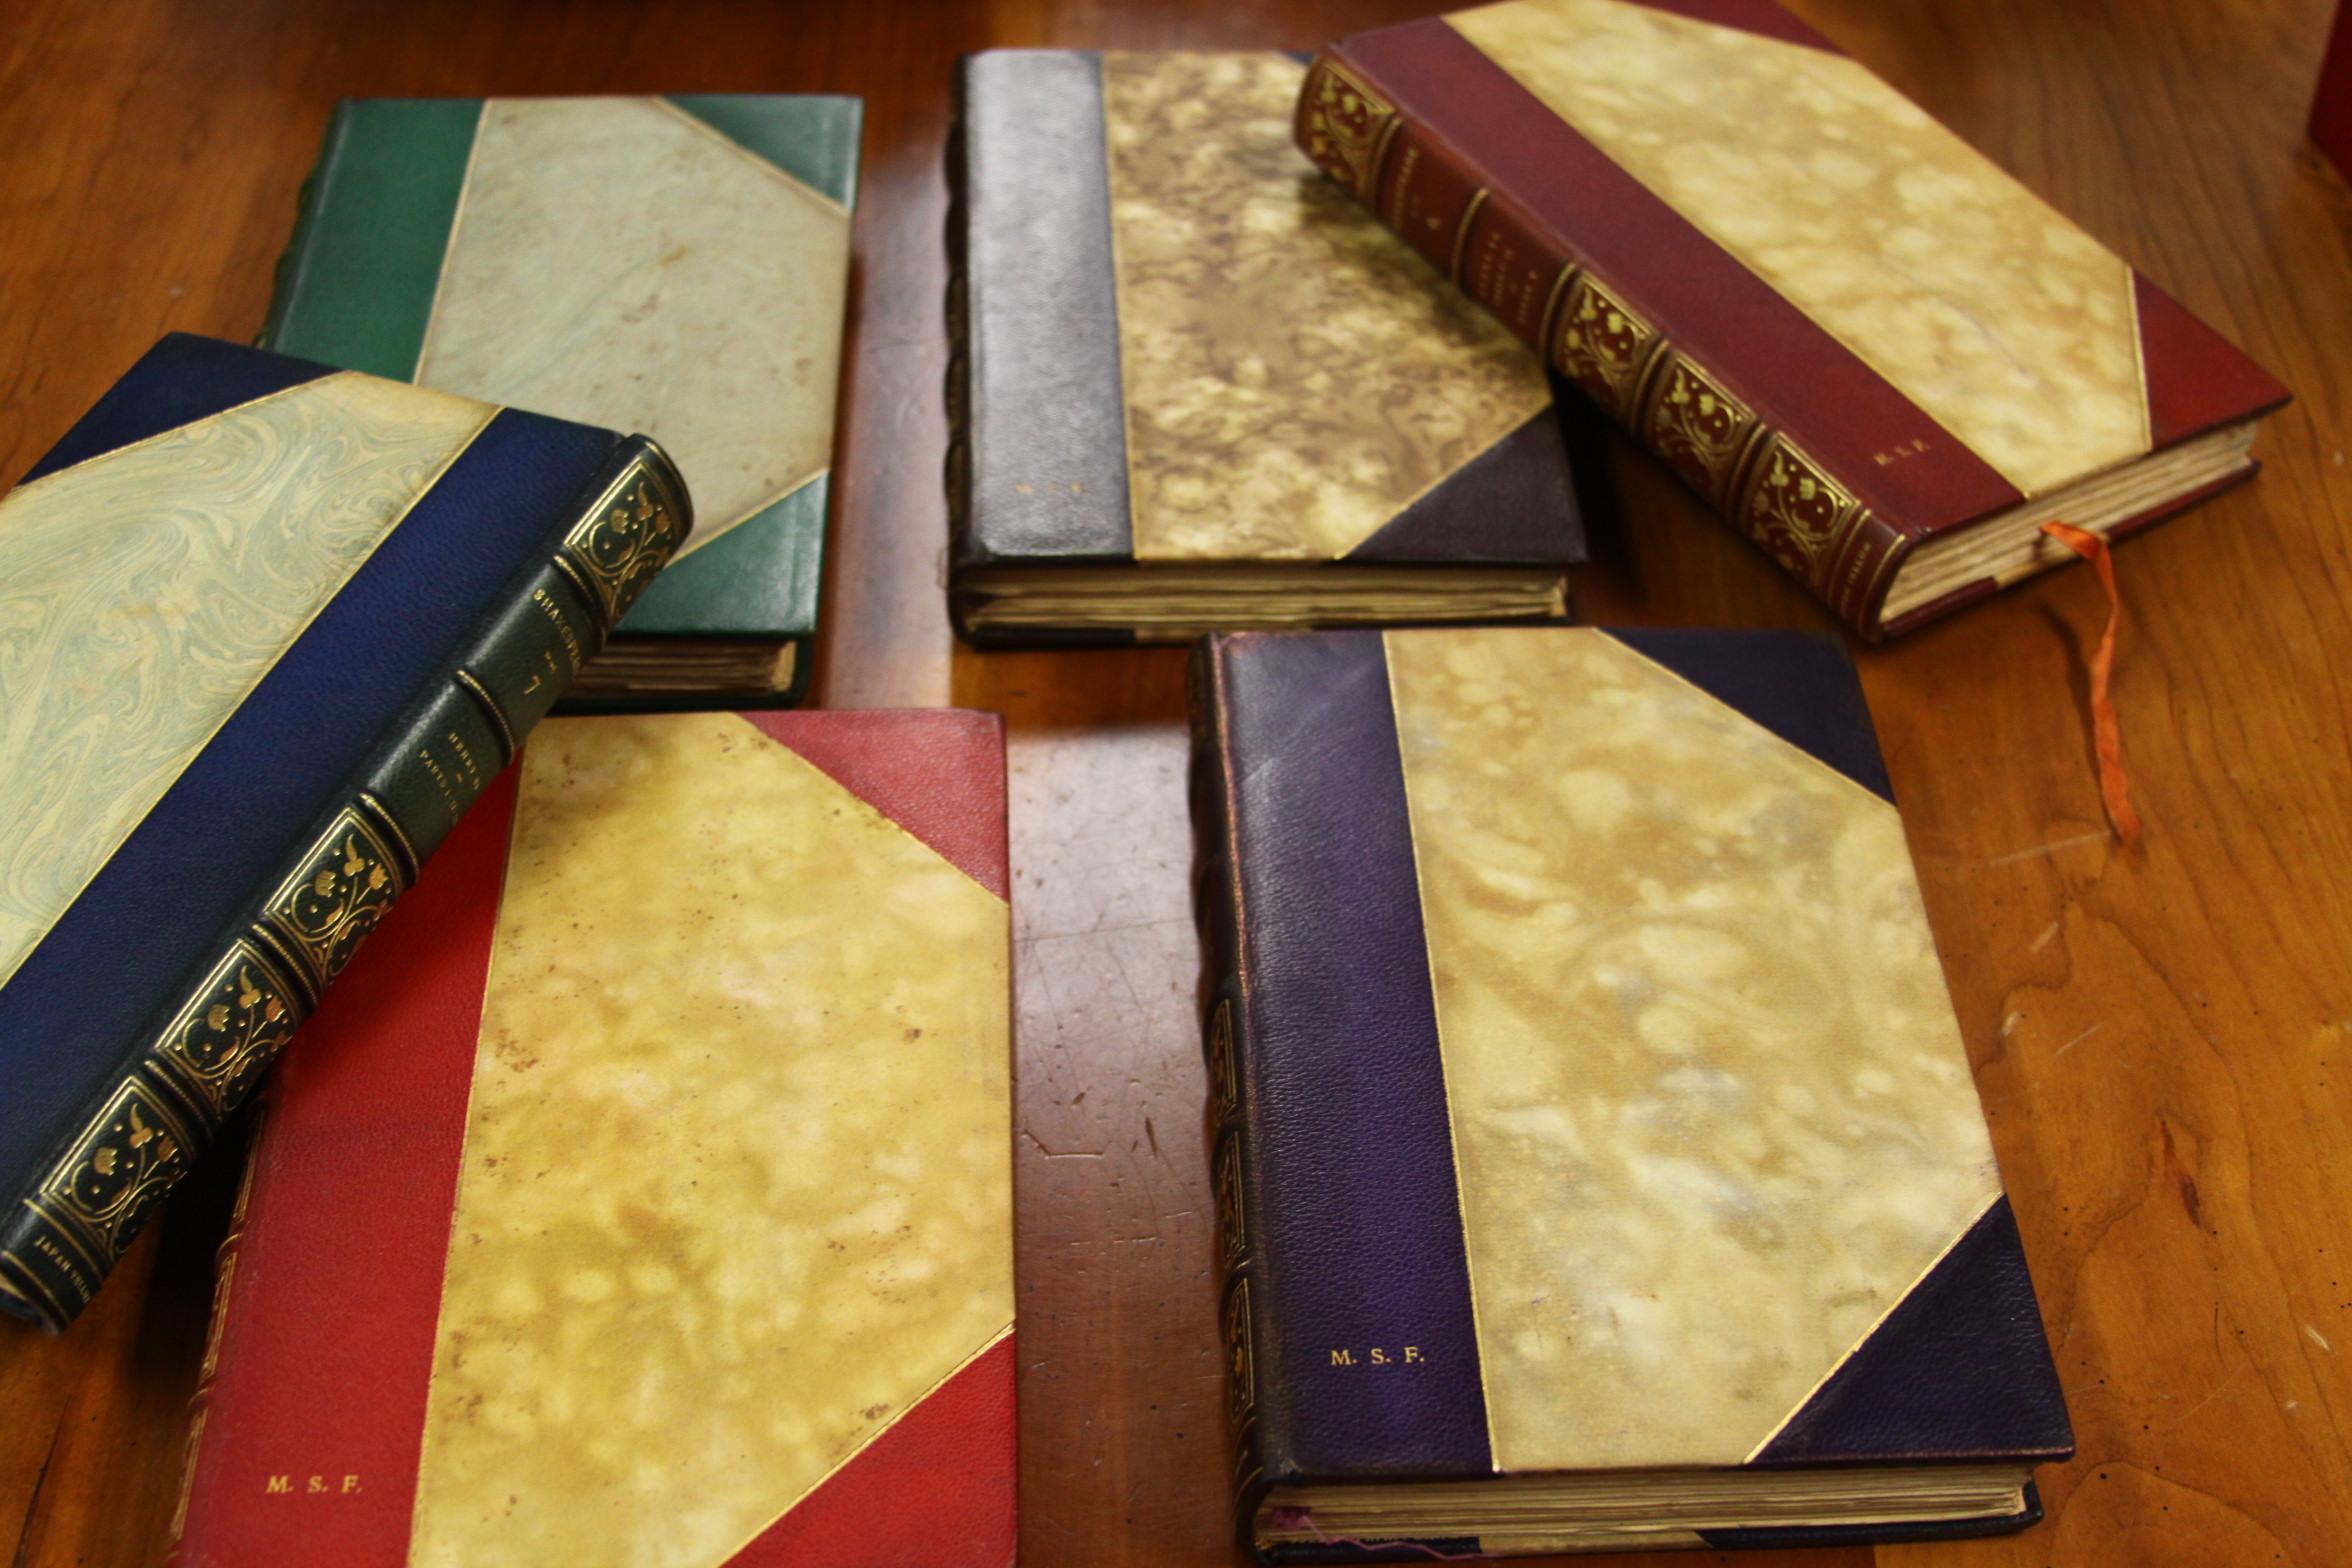 Books, The Works of William Shakespeare, Antique Leather-Bound Collections 2